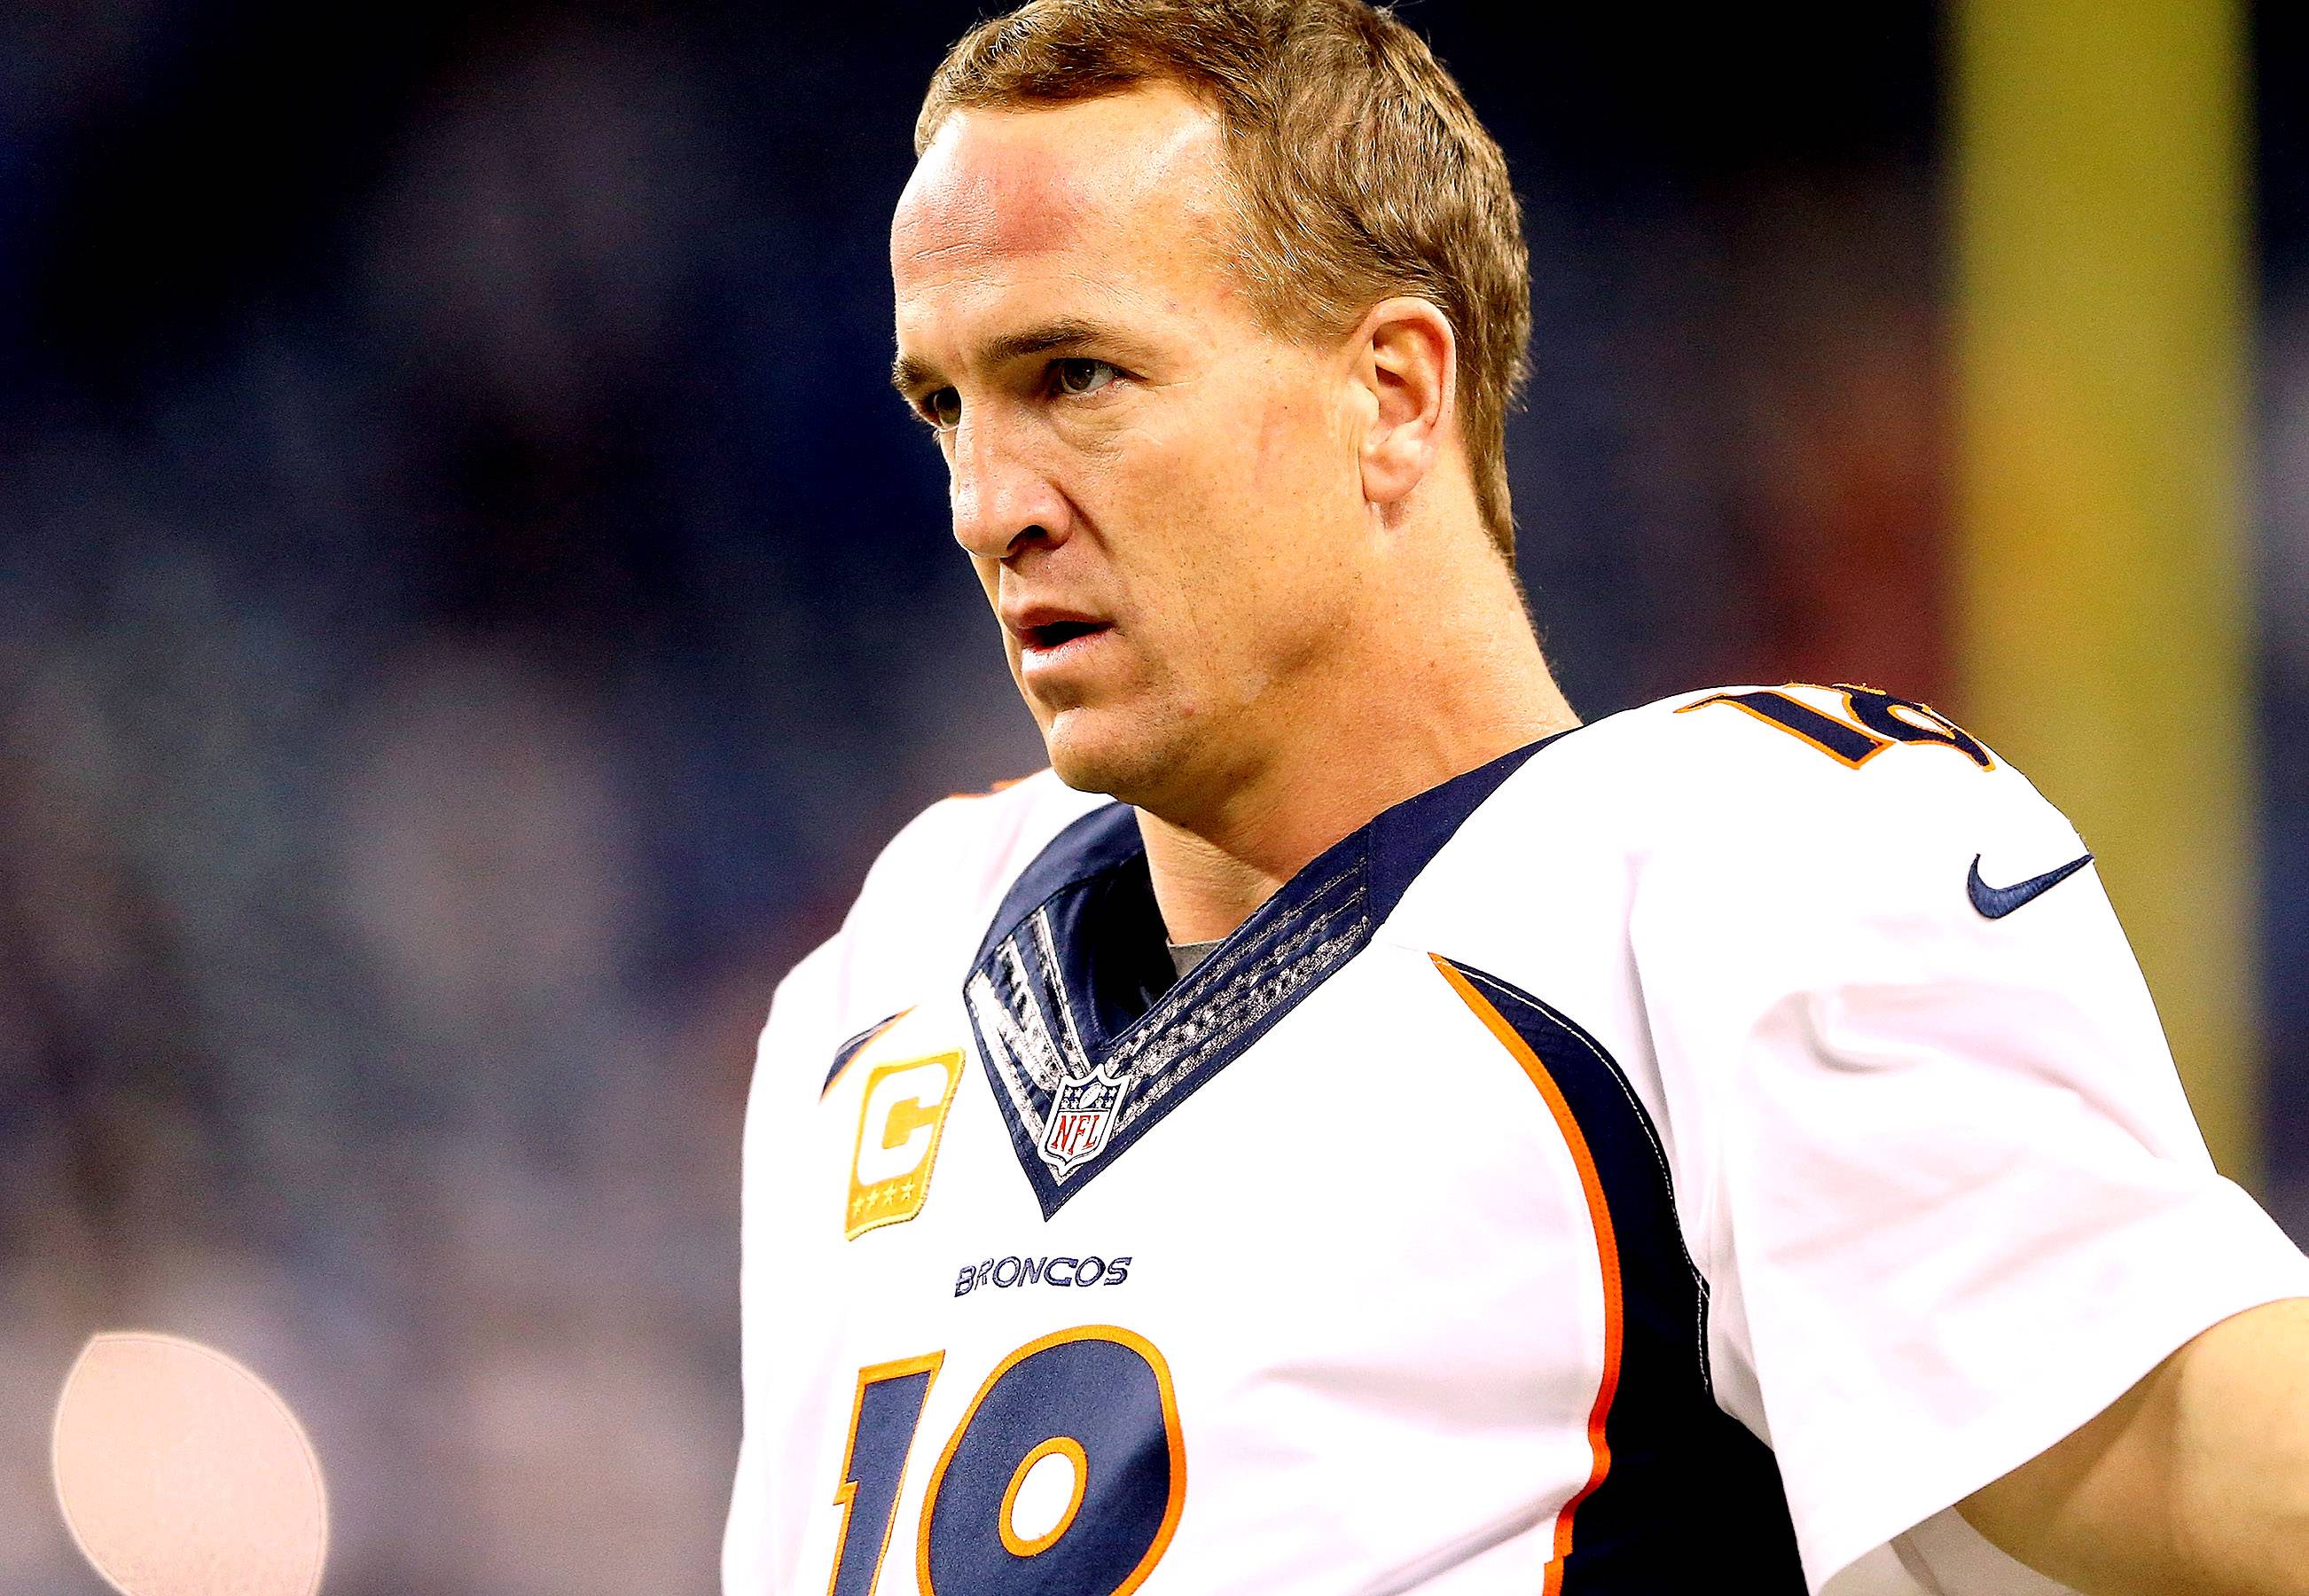 Game Changer - For the past few days,&nbsp;Peyton Manning&nbsp;has been fighting allegations that he used HGH, after it was reportedly shipped to his wife under her name recently. The Hall of Fame-bound&nbsp;Denver Broncos&nbsp;quarterback is just one of many athletes to be hit with drug charges — whether they're found to be true or false. BET.com used the occasion to pinpoint some of the more infamous drug charges levied against athletes across many sports.&nbsp;(Photo: Leon Halip/Getty Images)